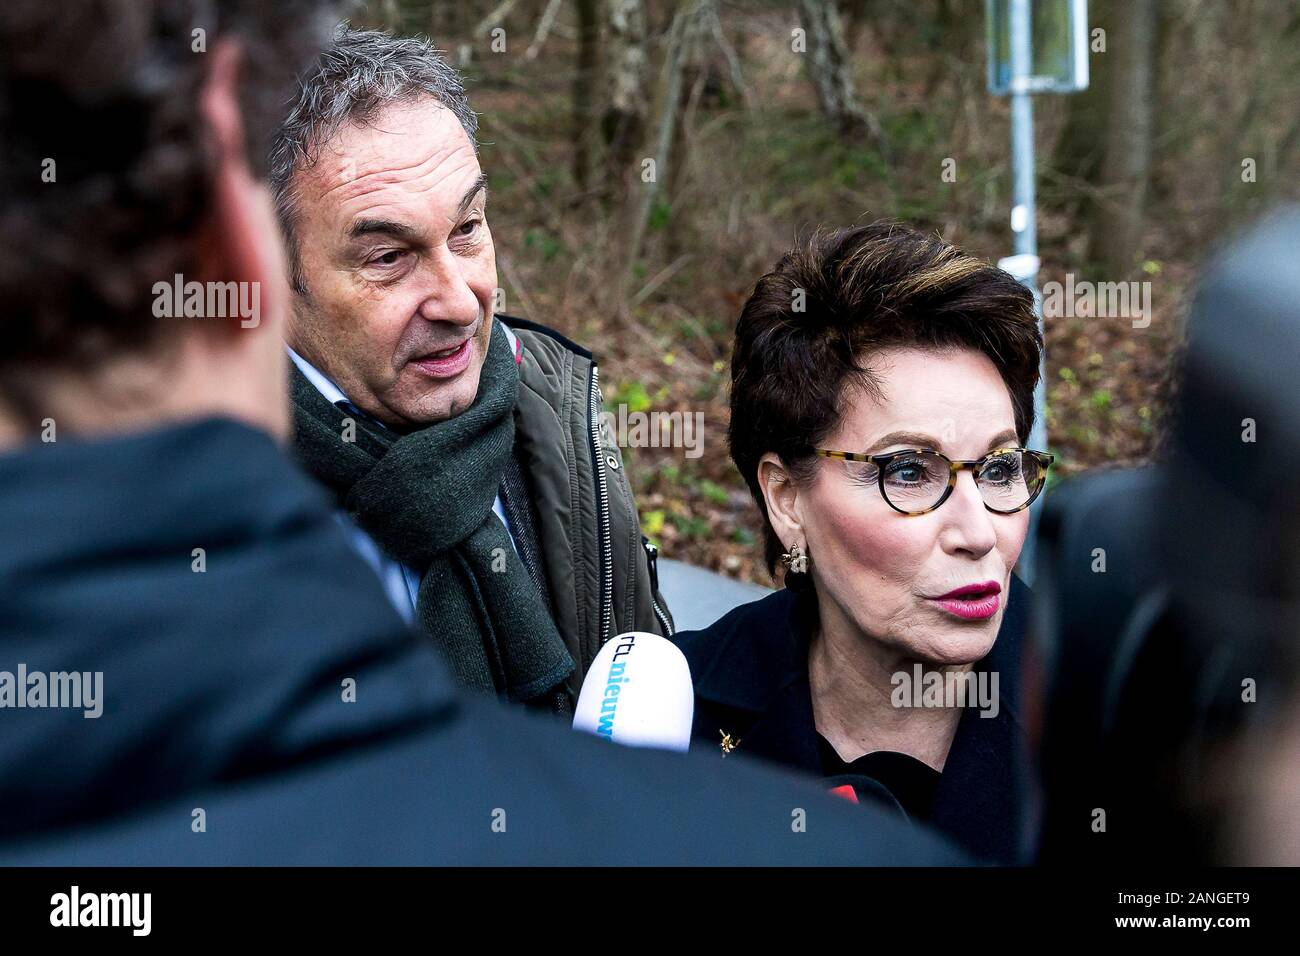 VUGHT - 17-01-2020, pi Vught. Brother of Johan van Laarhoven, Frans, and  Lawyer Carry Knoops arriving at the Penitentiaire Inrichting (pi) Vught.  Credit: Pro Shots/Alamy Live News Stock Photo - Alamy